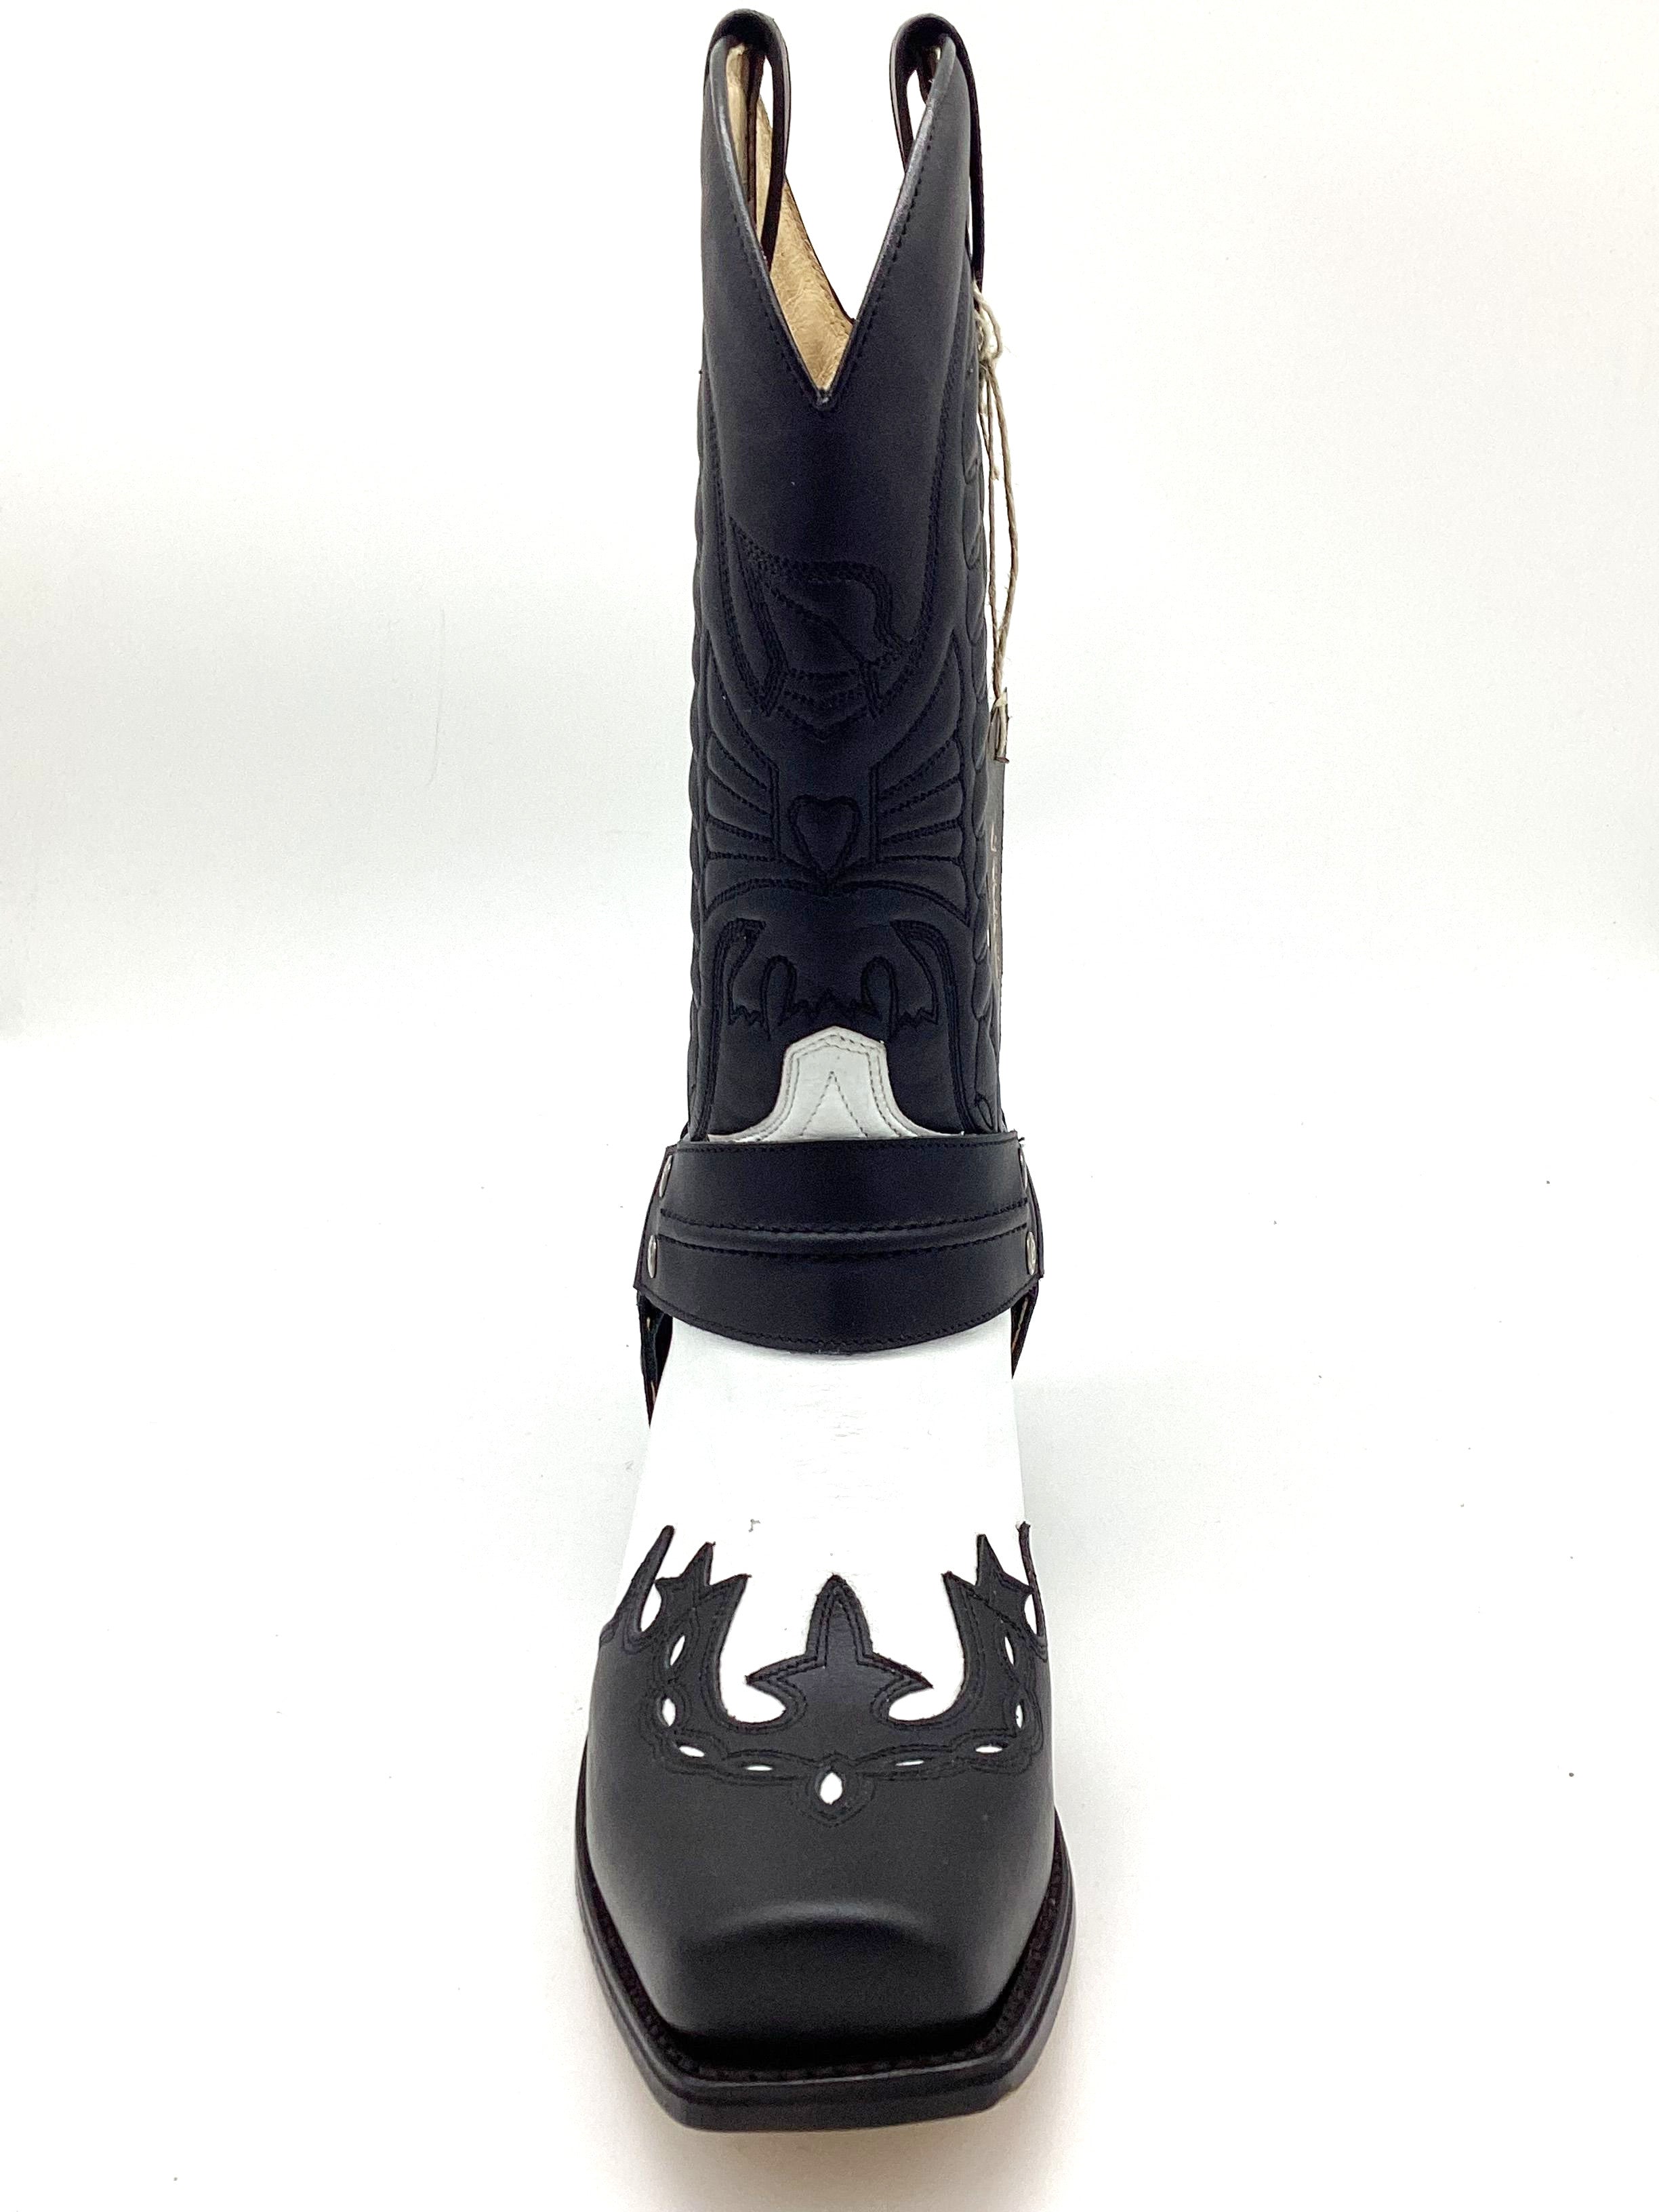 Sendra Boots Boots White/Black Real Leather Cowboy Biker Boots Exclusive & Limited